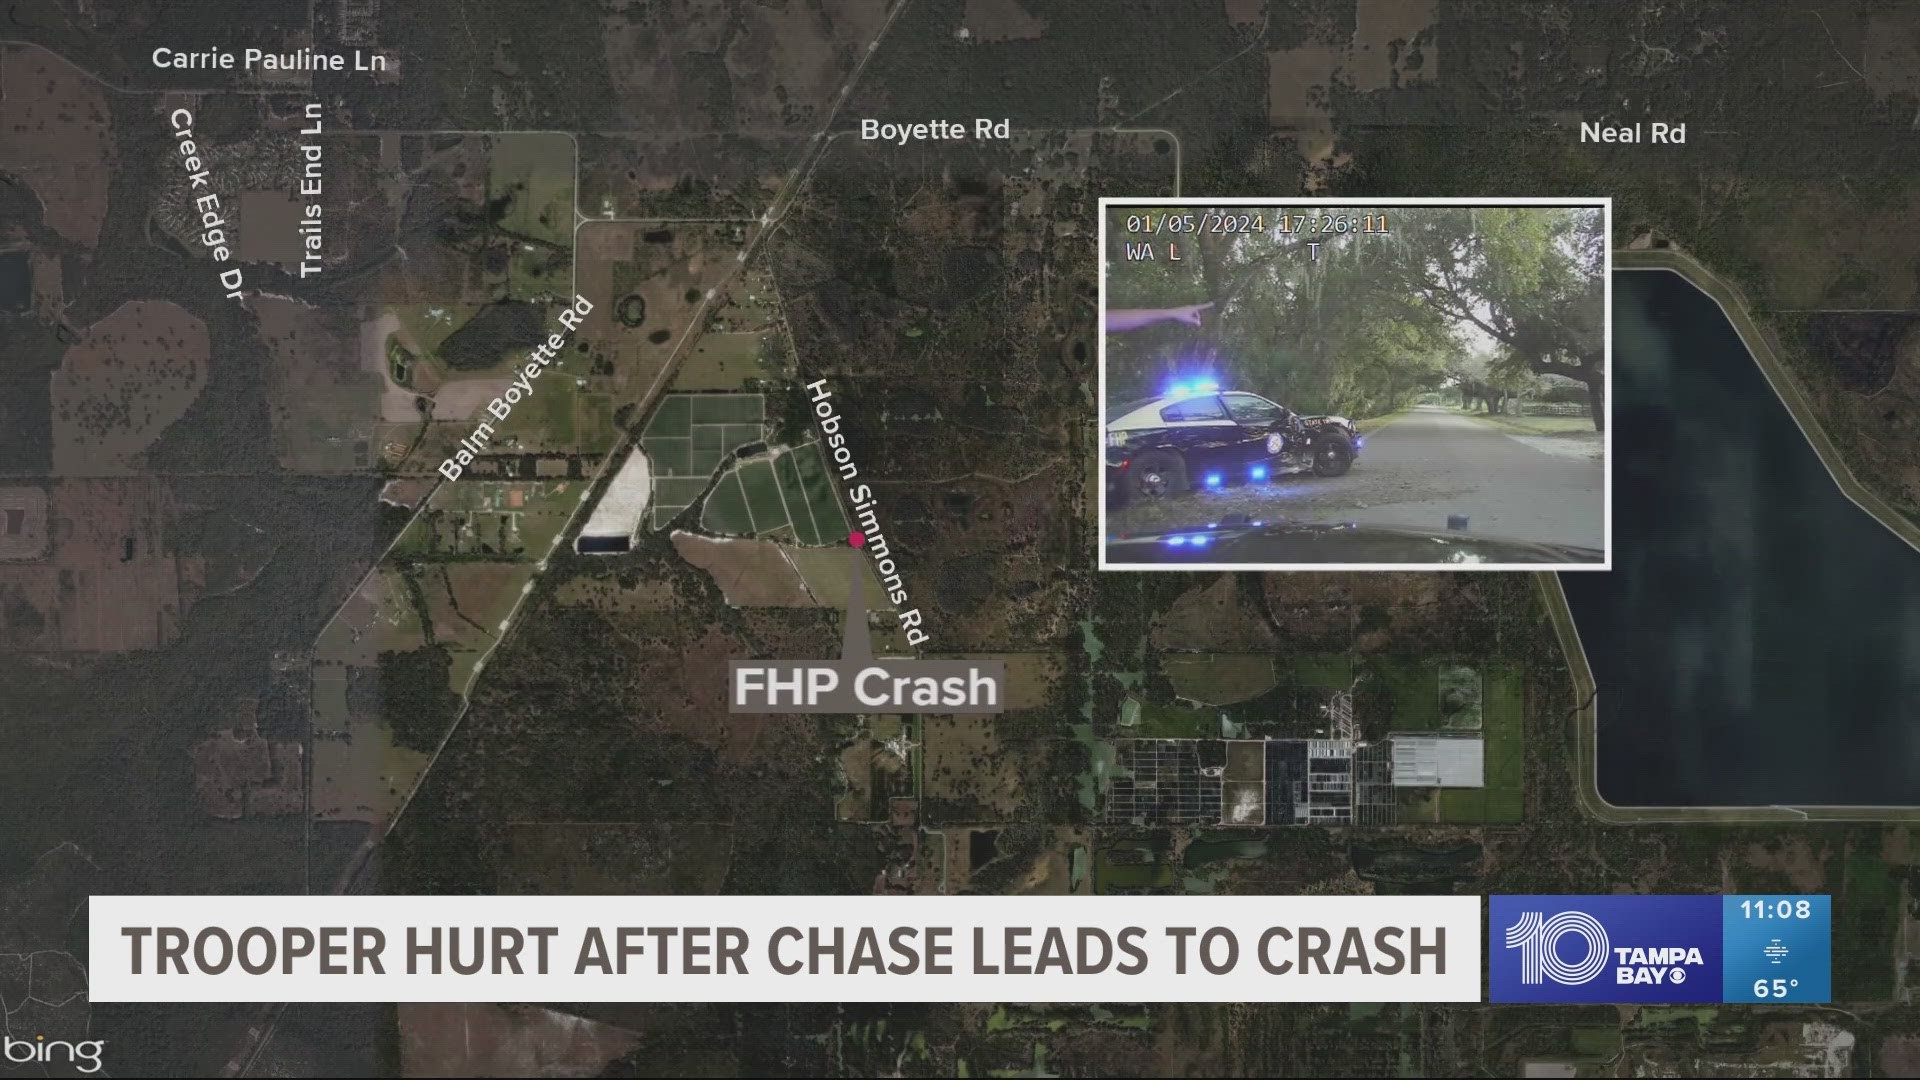 A Florida Highway Patrol trooper was briefly hospitalized after he lost control of his patrol car and crashed into a ditch while chasing after a driver.